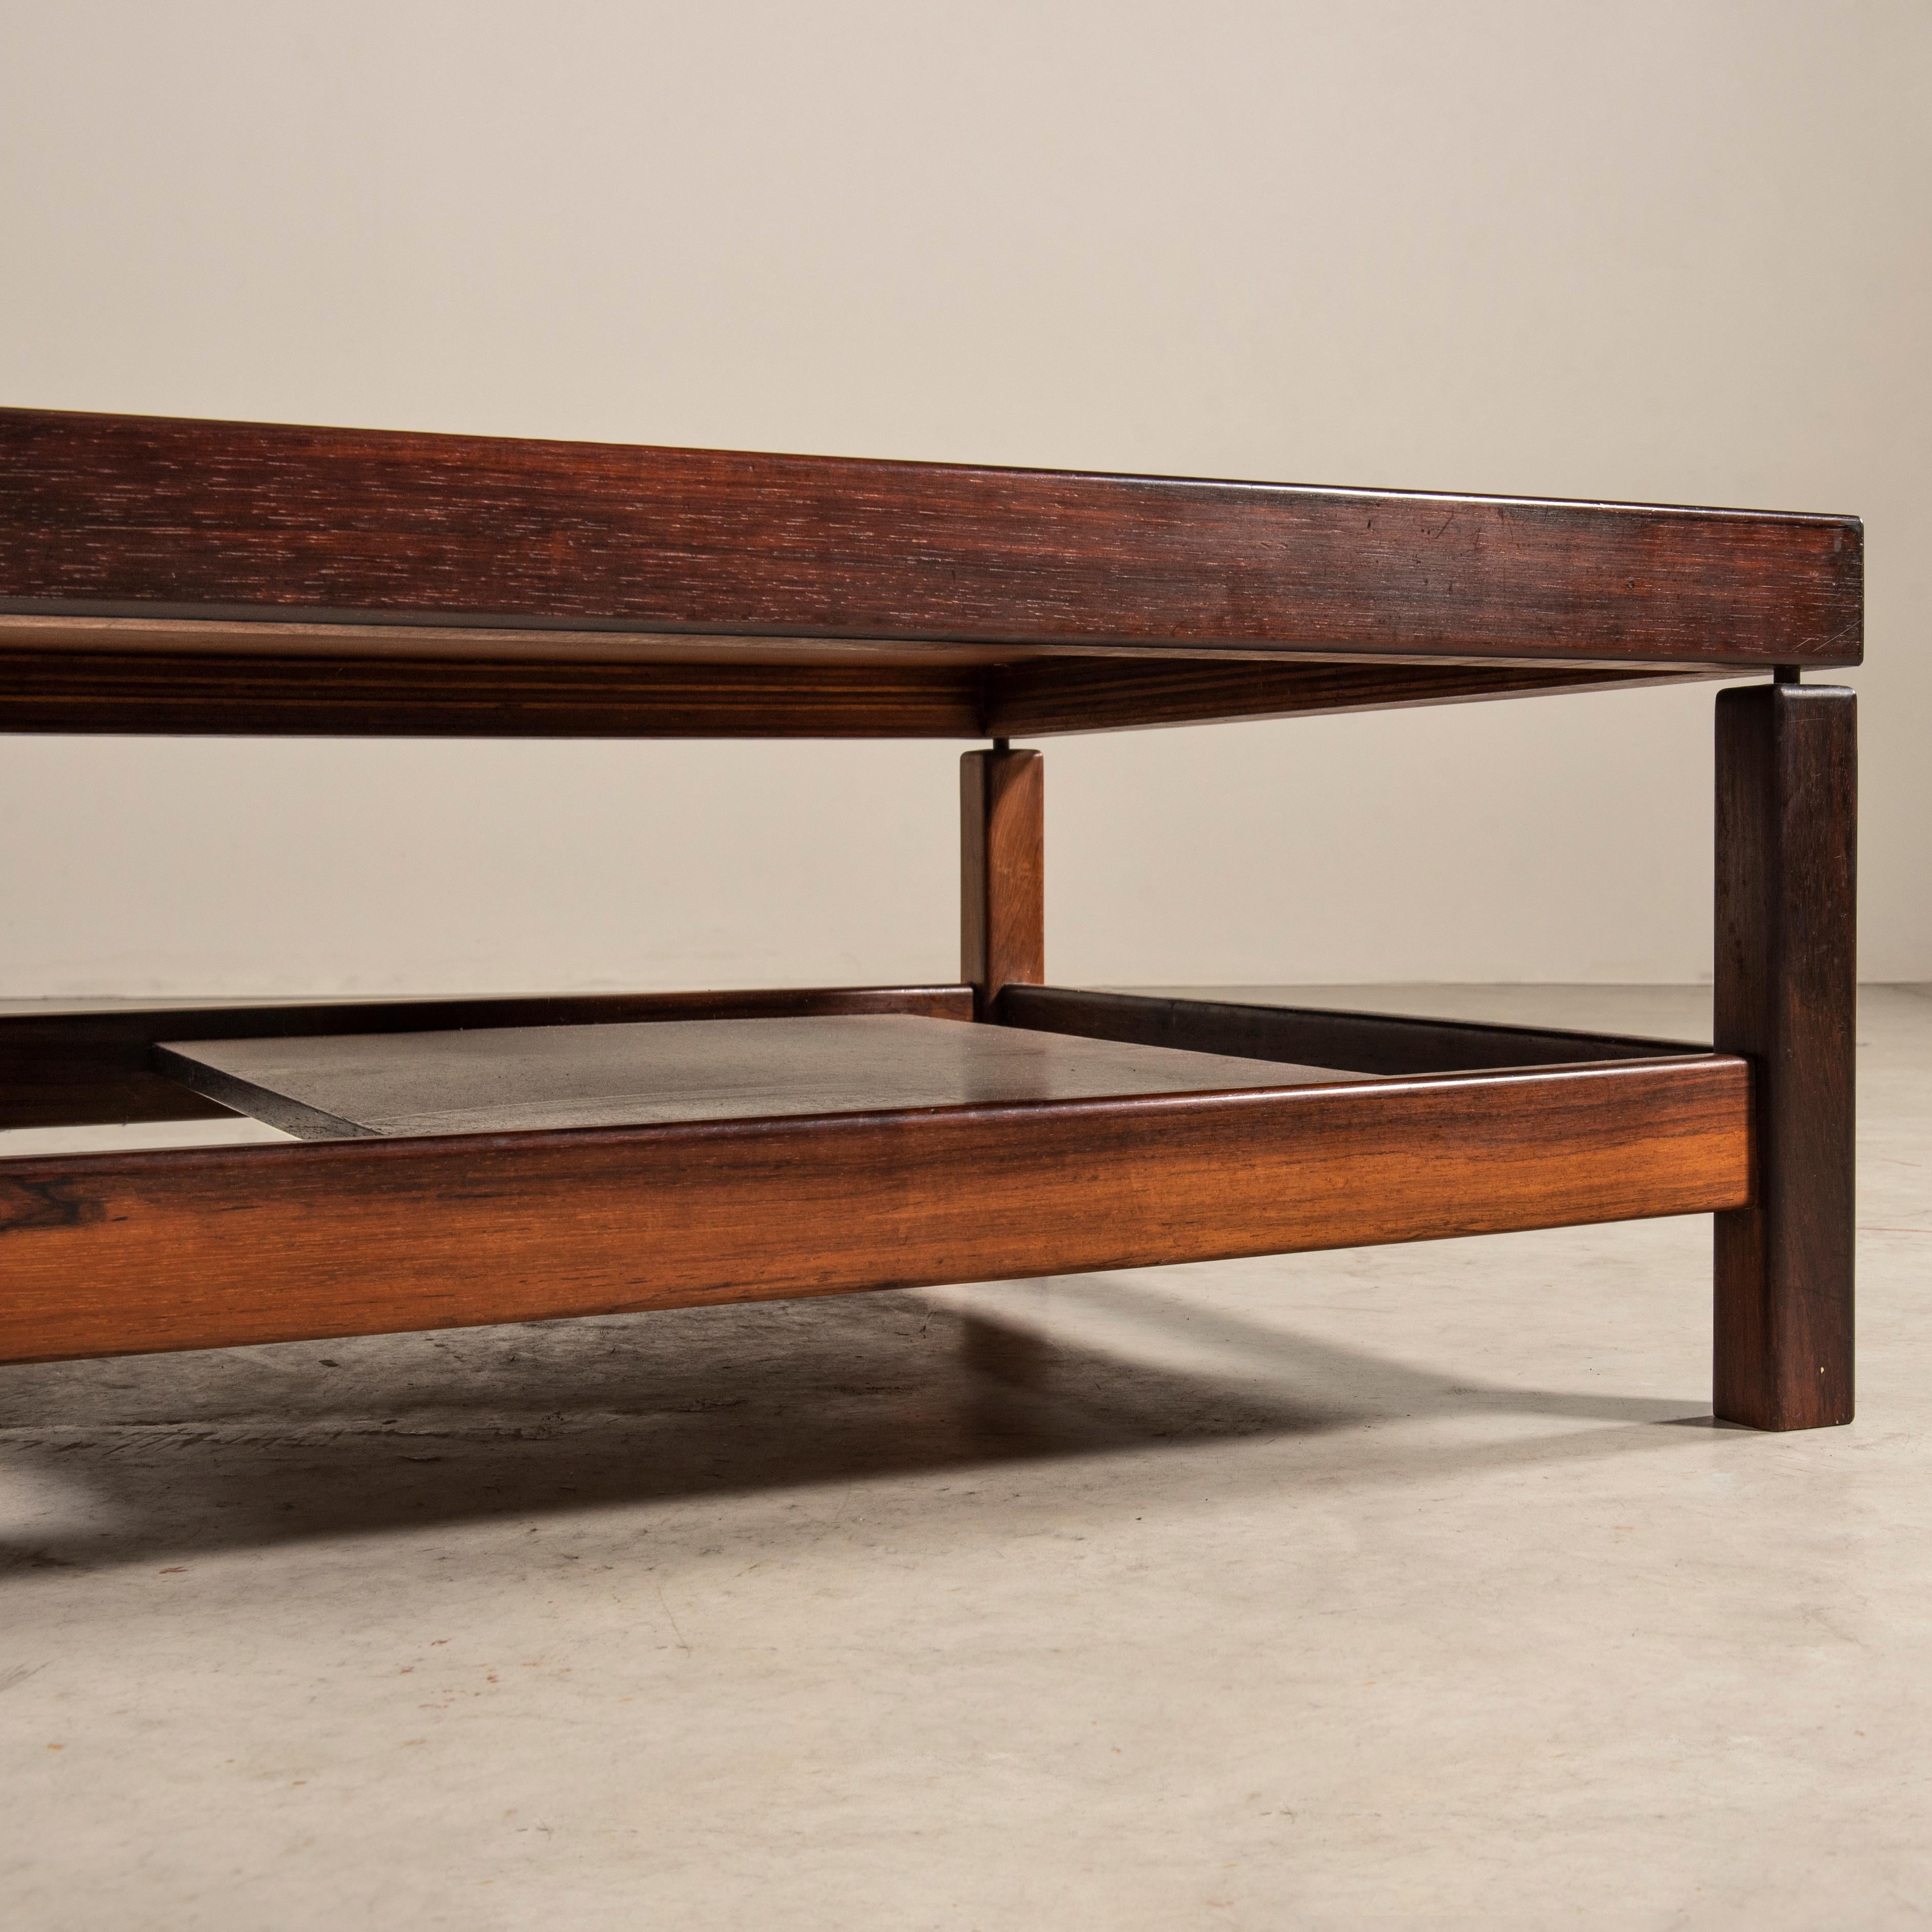 Minimalist Rectangular Coffee Table in Solid Wood, Brazilian Mid-century Modern  In Good Condition For Sale In Sao Paulo, SP